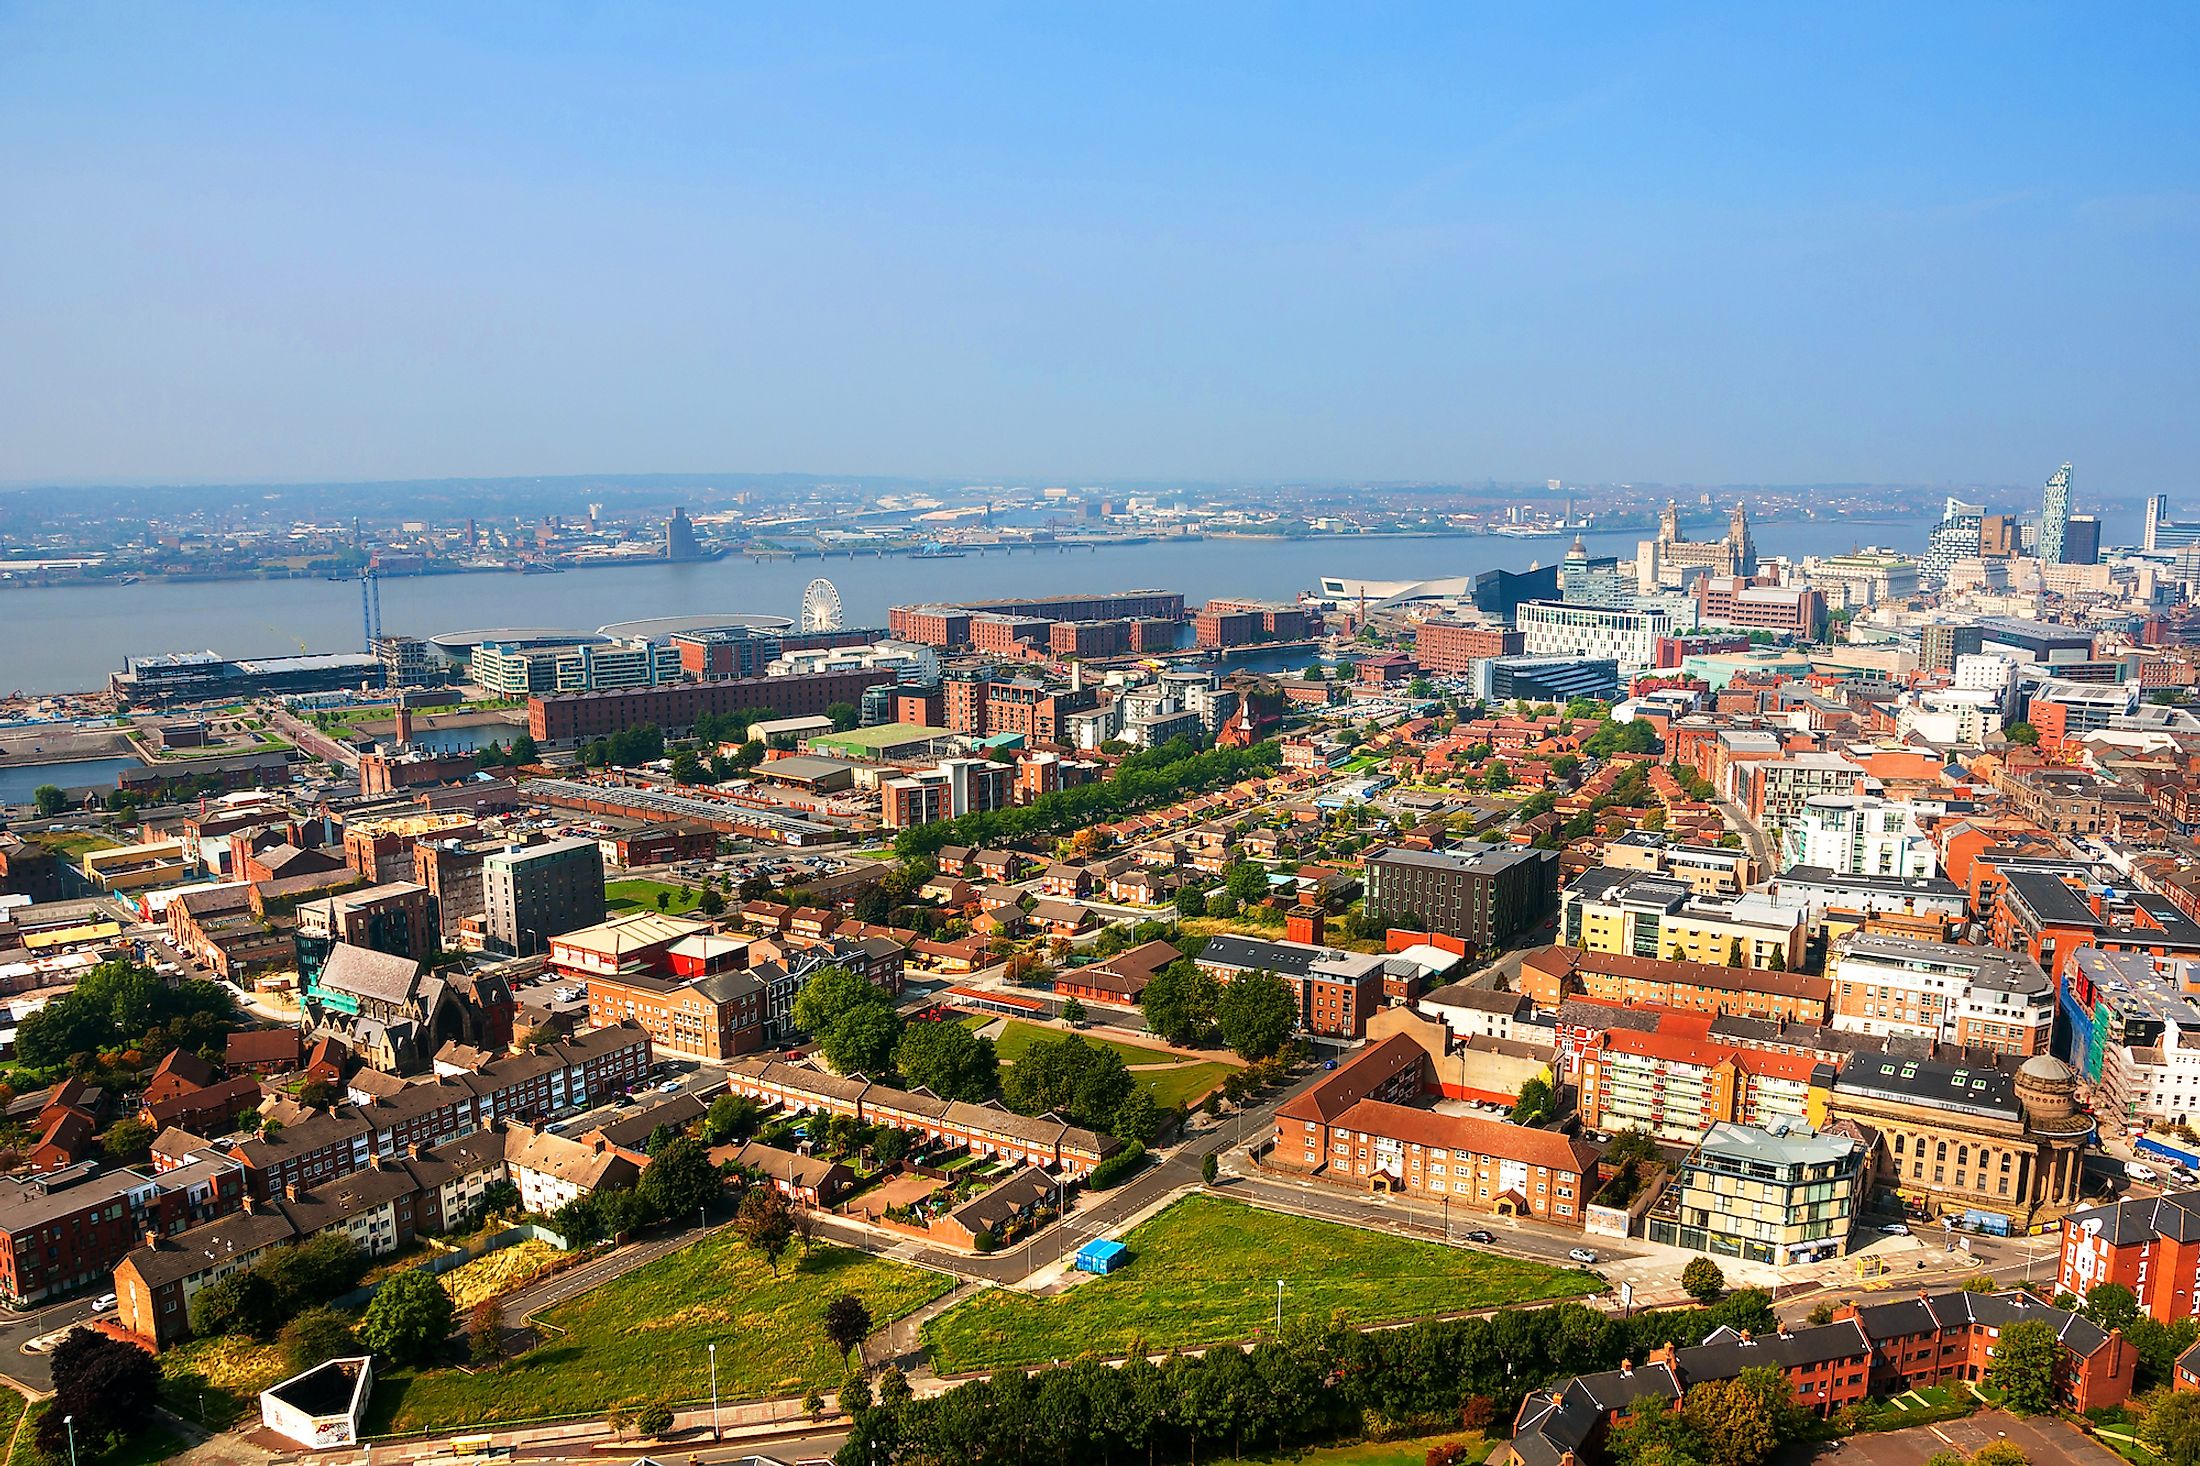  Aerial view of Liverpool, UK residential area and downtown